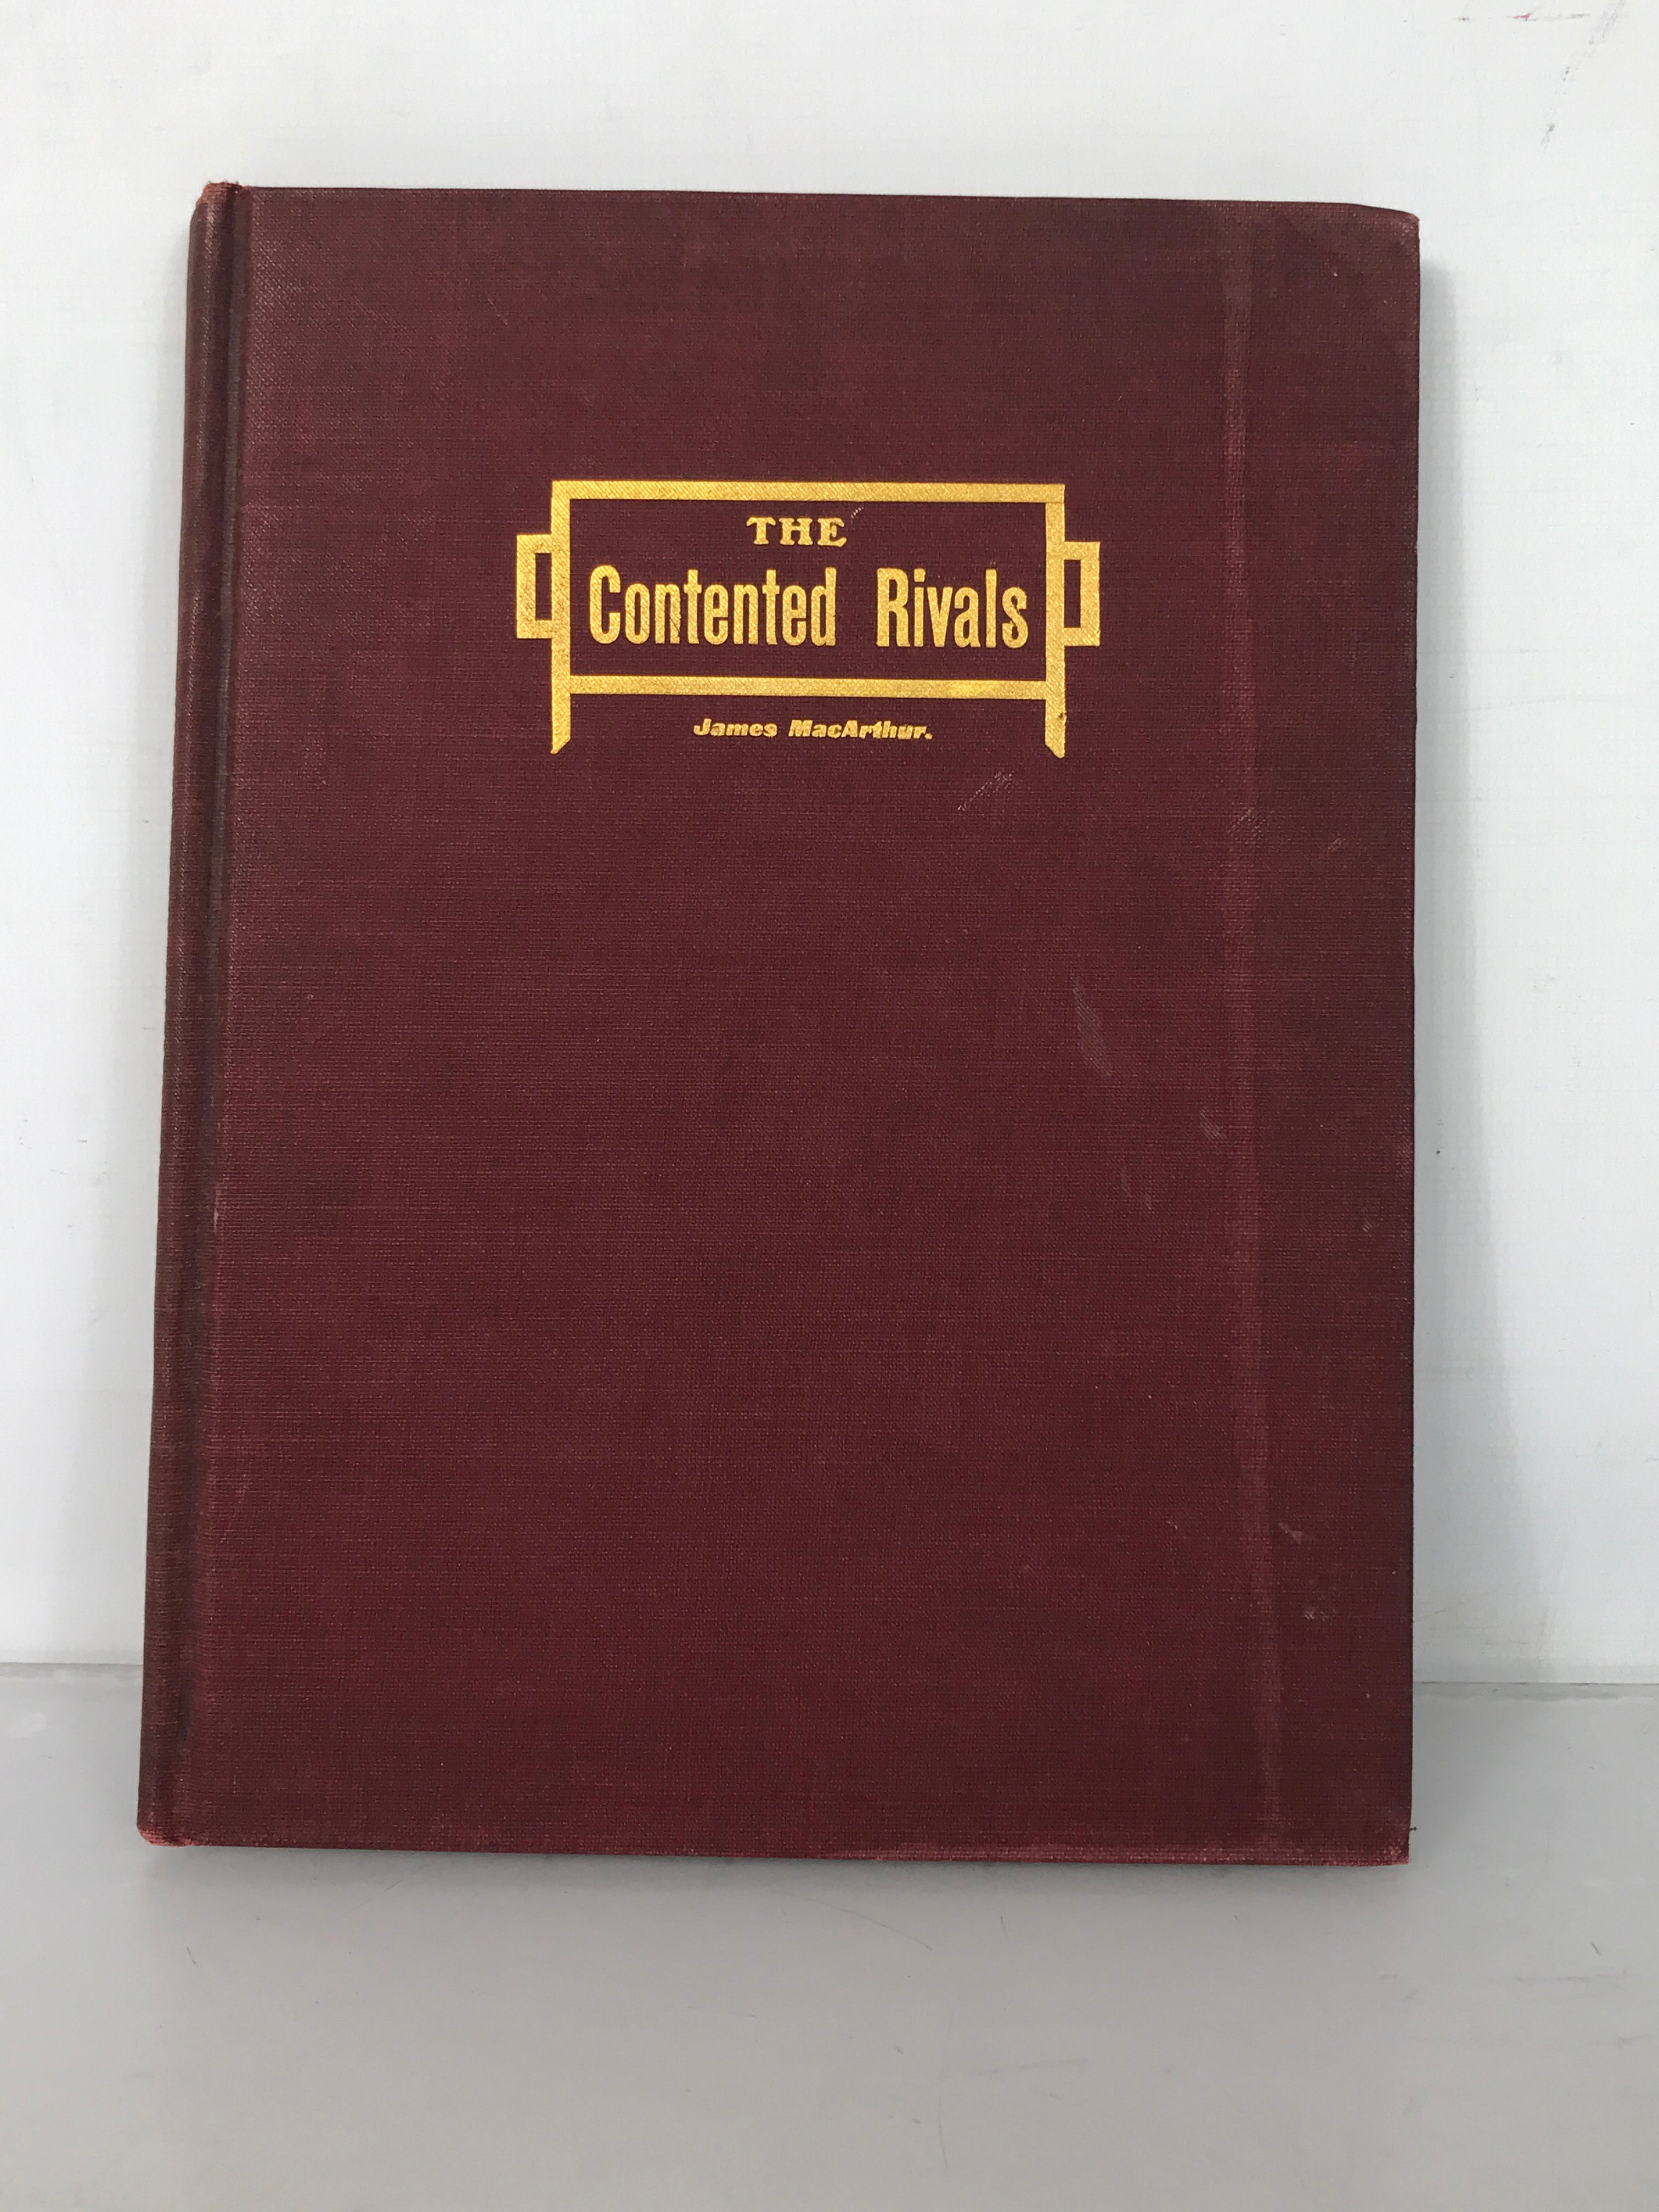 The Contented Rivals James MacArthur 1908 HC